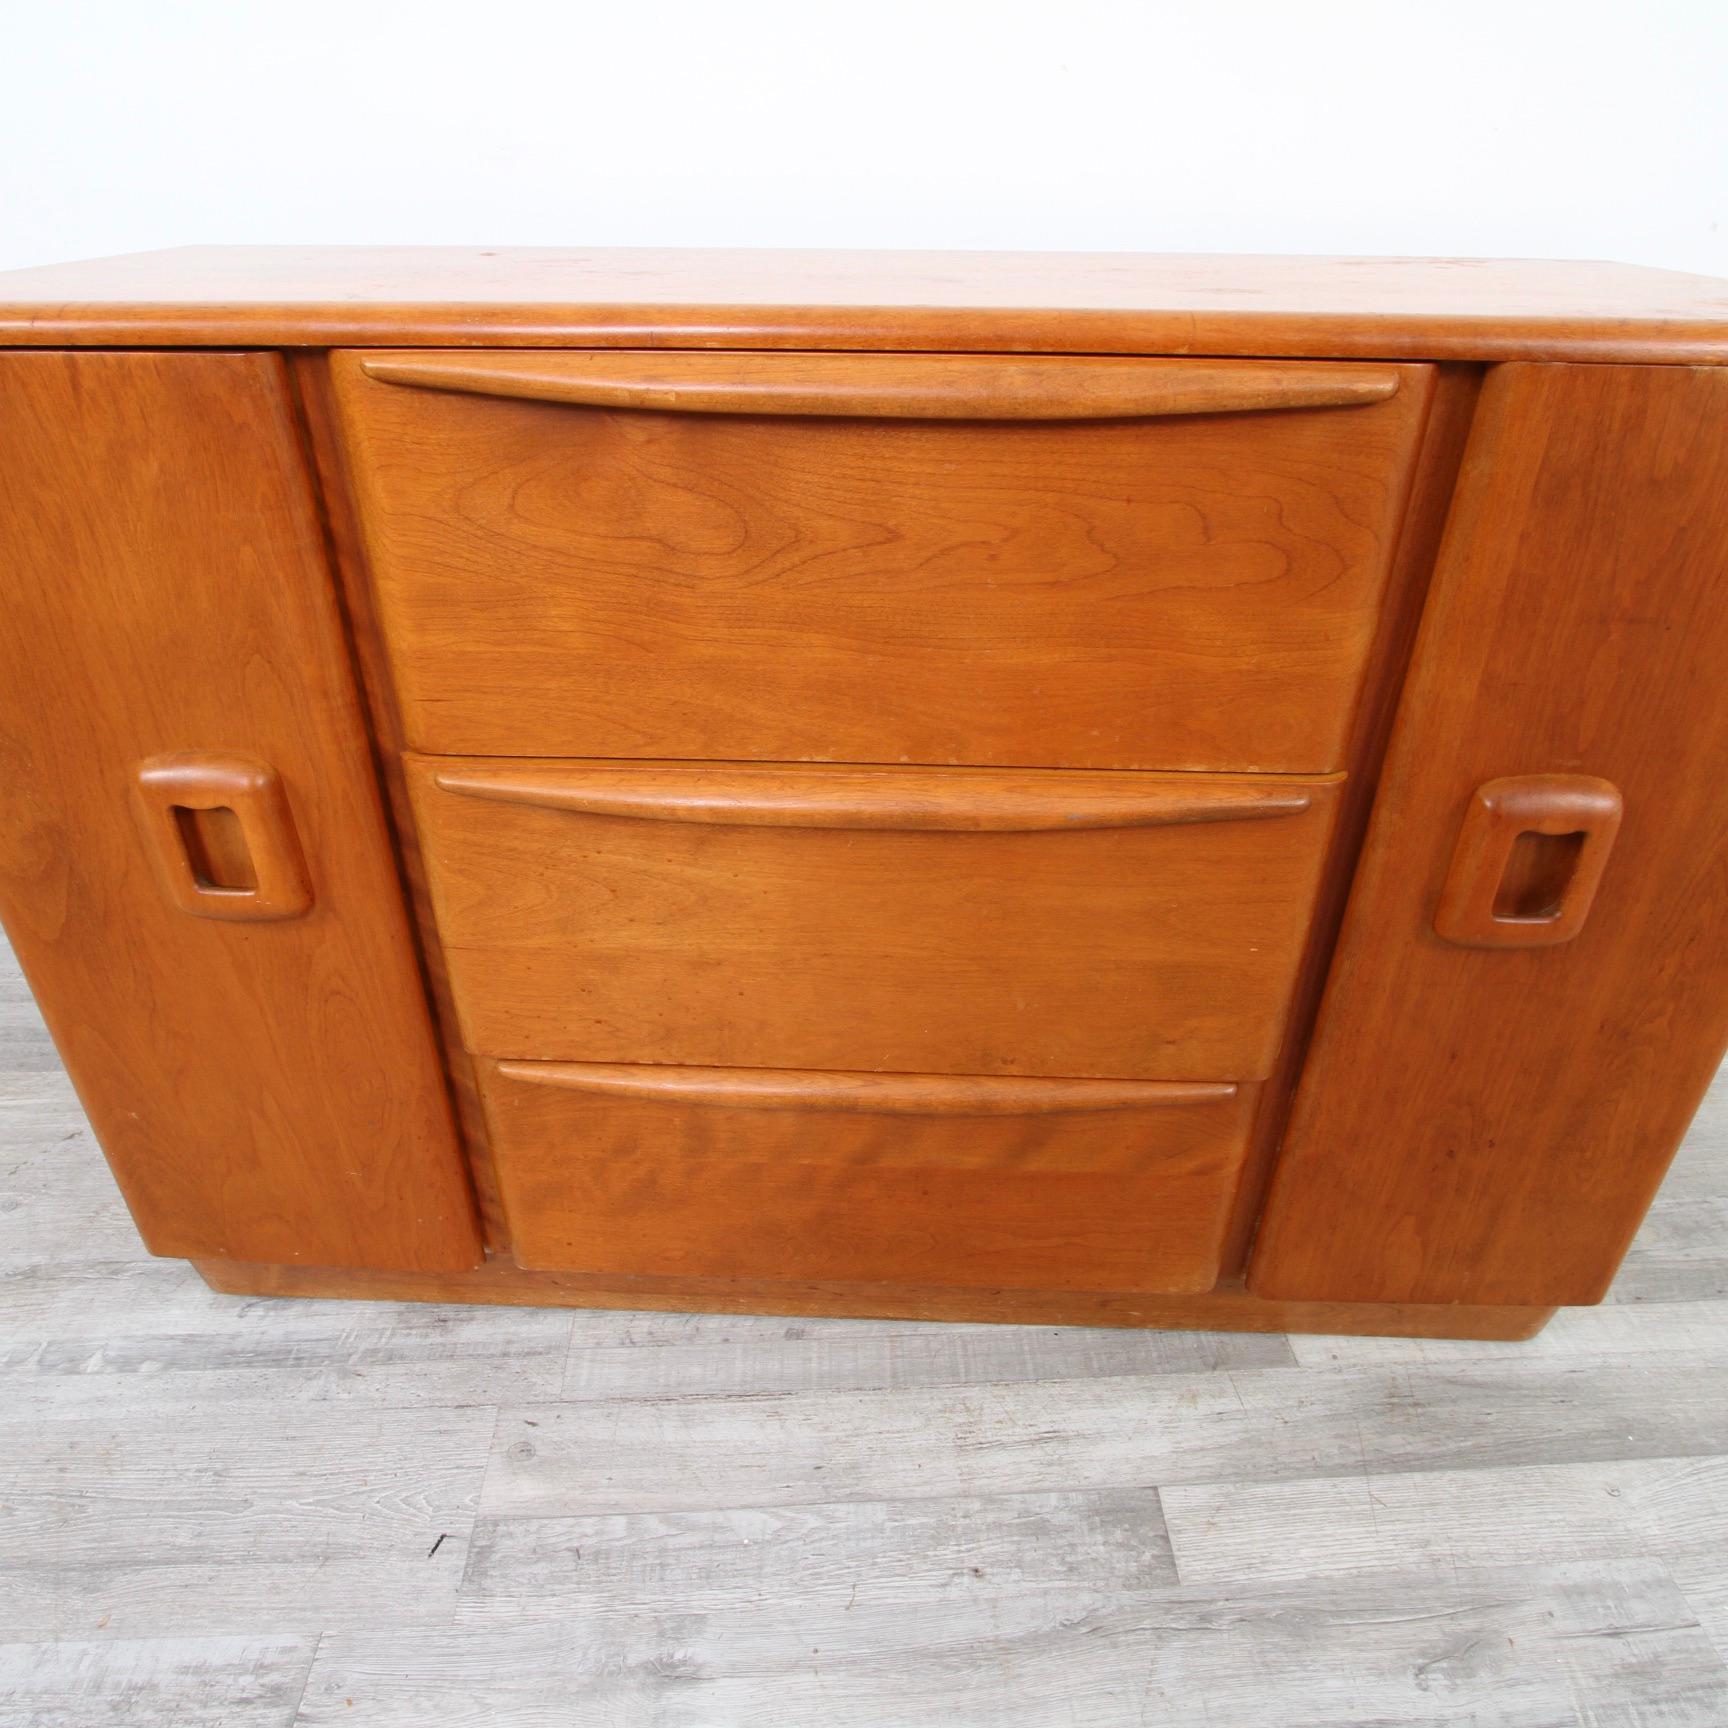 Mid-Century Modern Heywood Wakefield Isabel Credenza in Wheat, c1950 For Sale